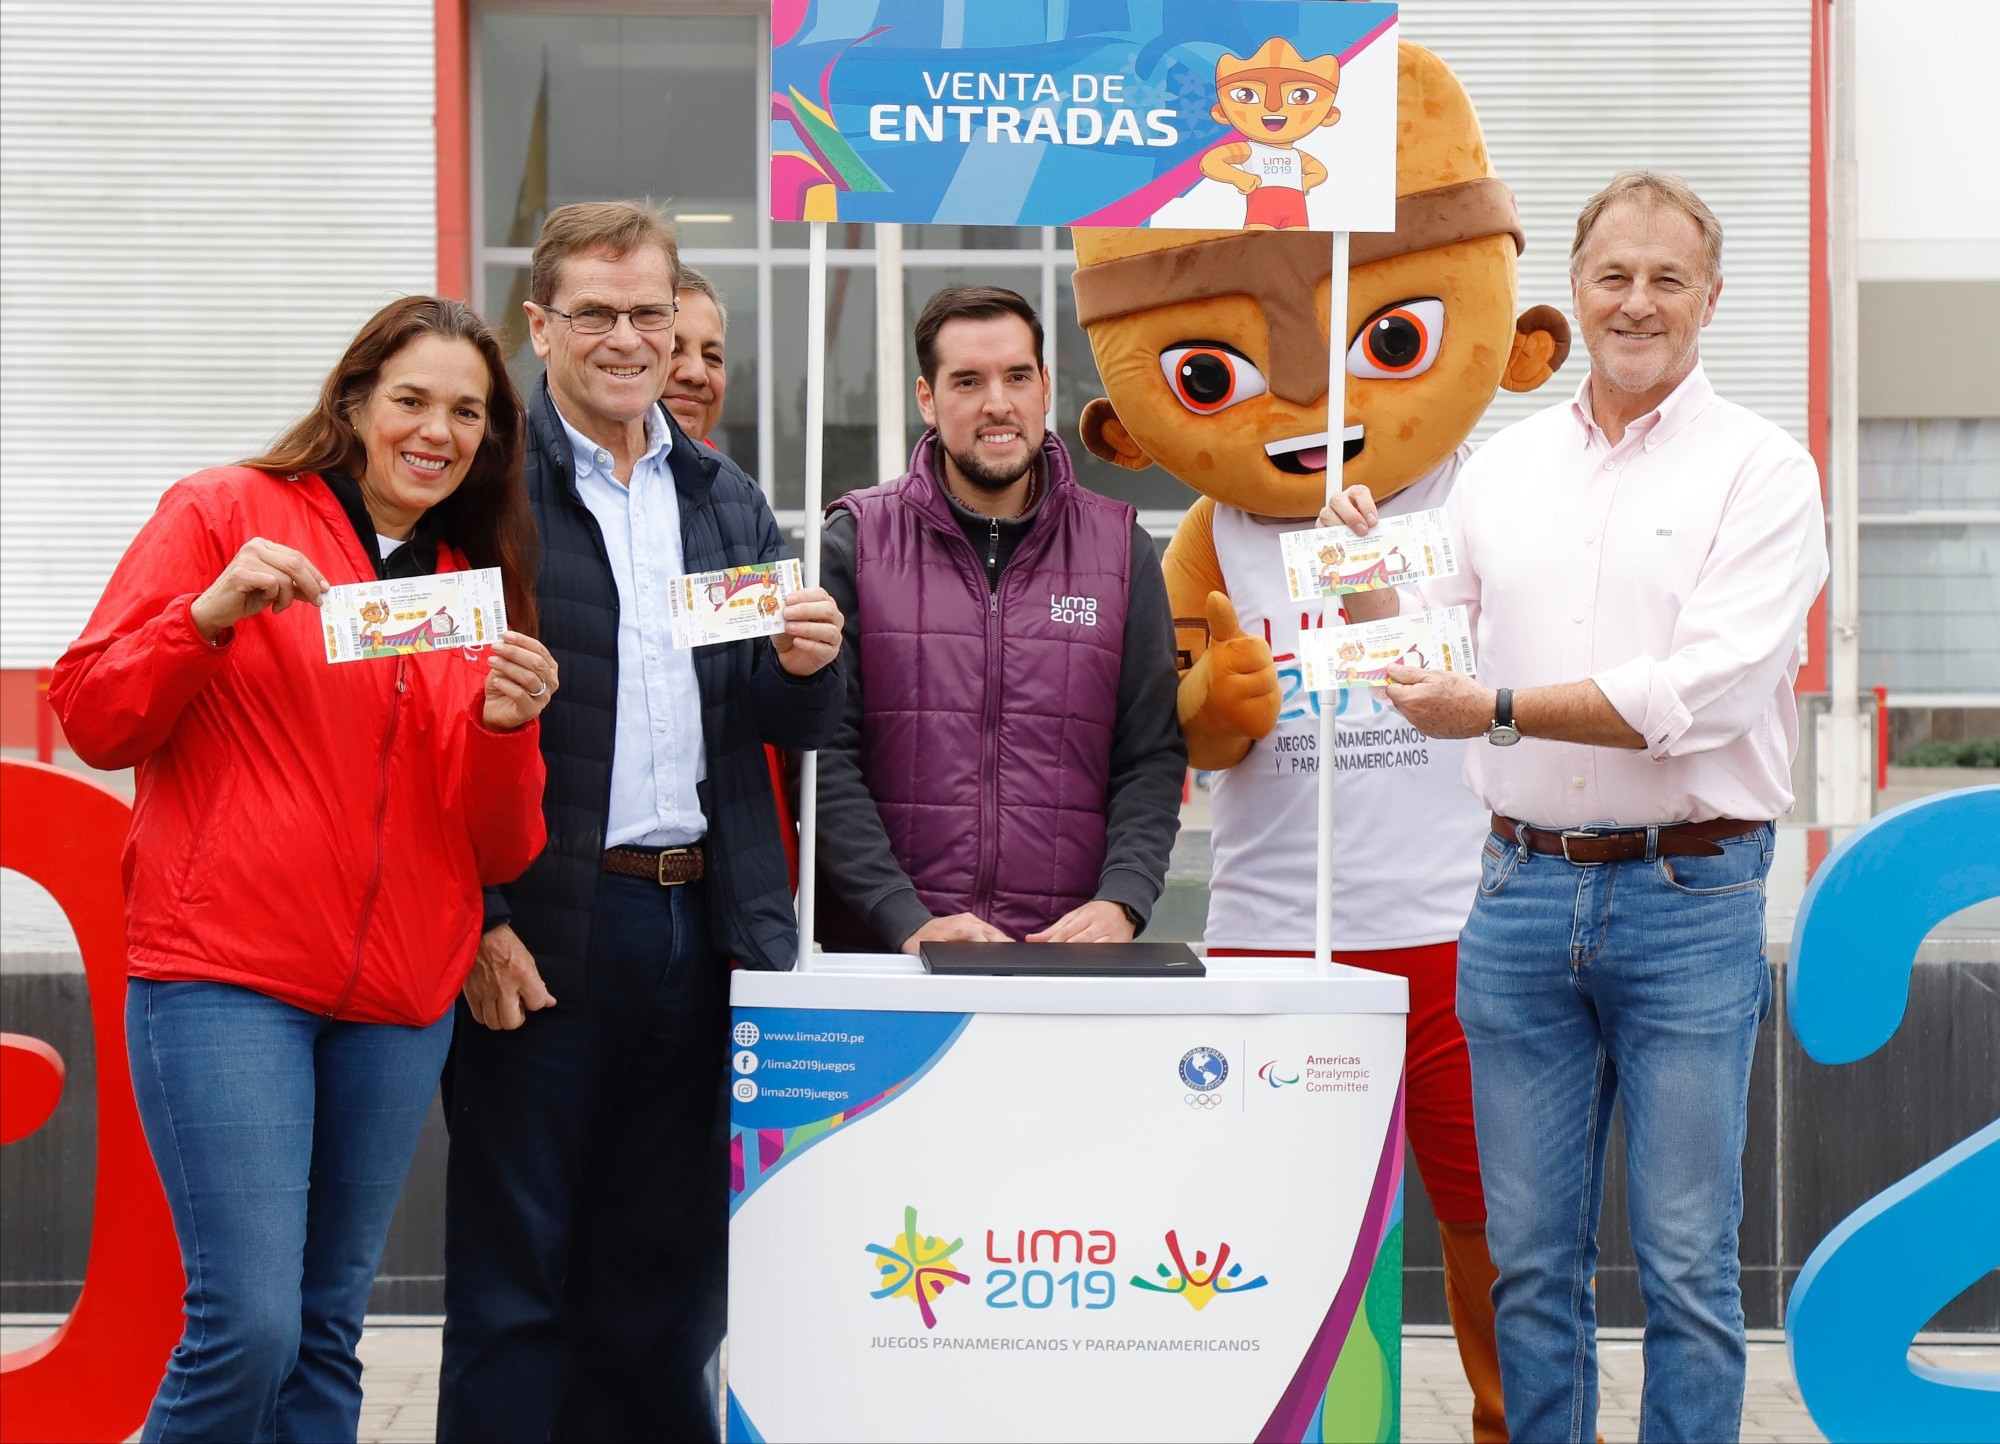 Tickets for the Lima 2019 Parapan American Games have gone on sale ©Lima 2019